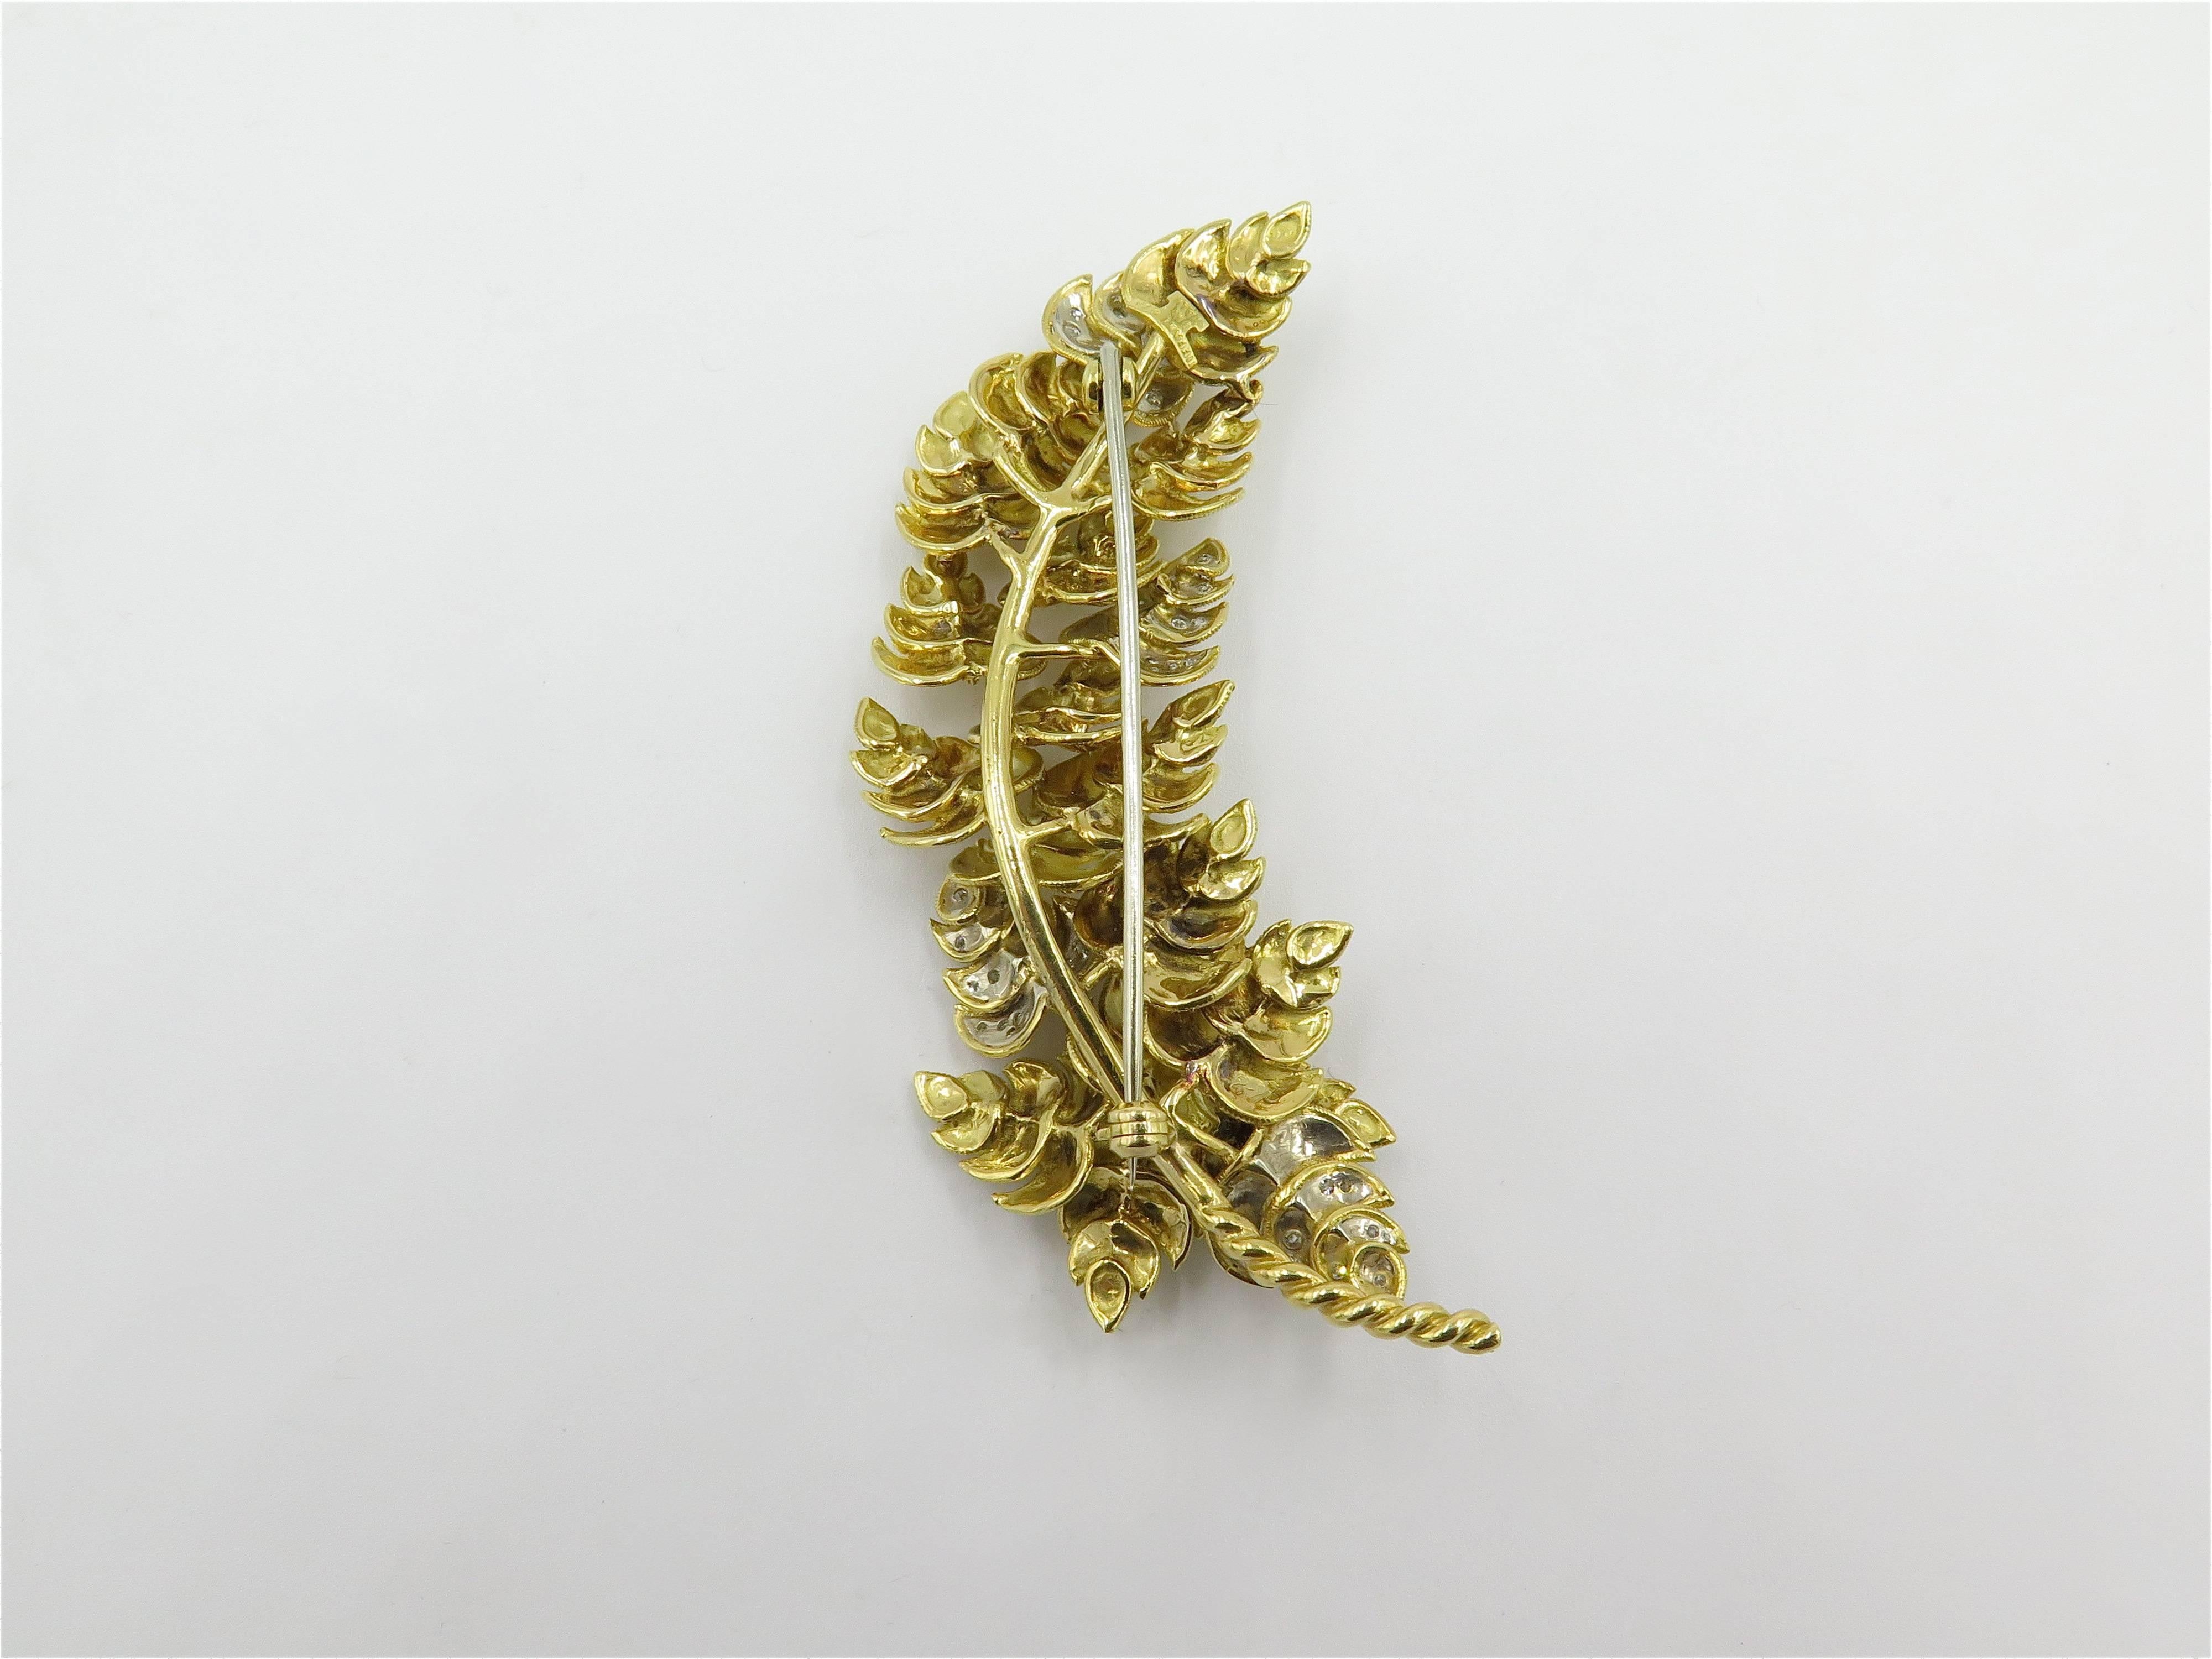 An 18 karat yellow gold and diamond brooch. Tiffany & Co. Italy. Circa 1960. Designed as a textured foliate spray, enhanced by circular cut diamonds. Length is approximately 3 inches. Gross weight is approximately 33.1 grams. 